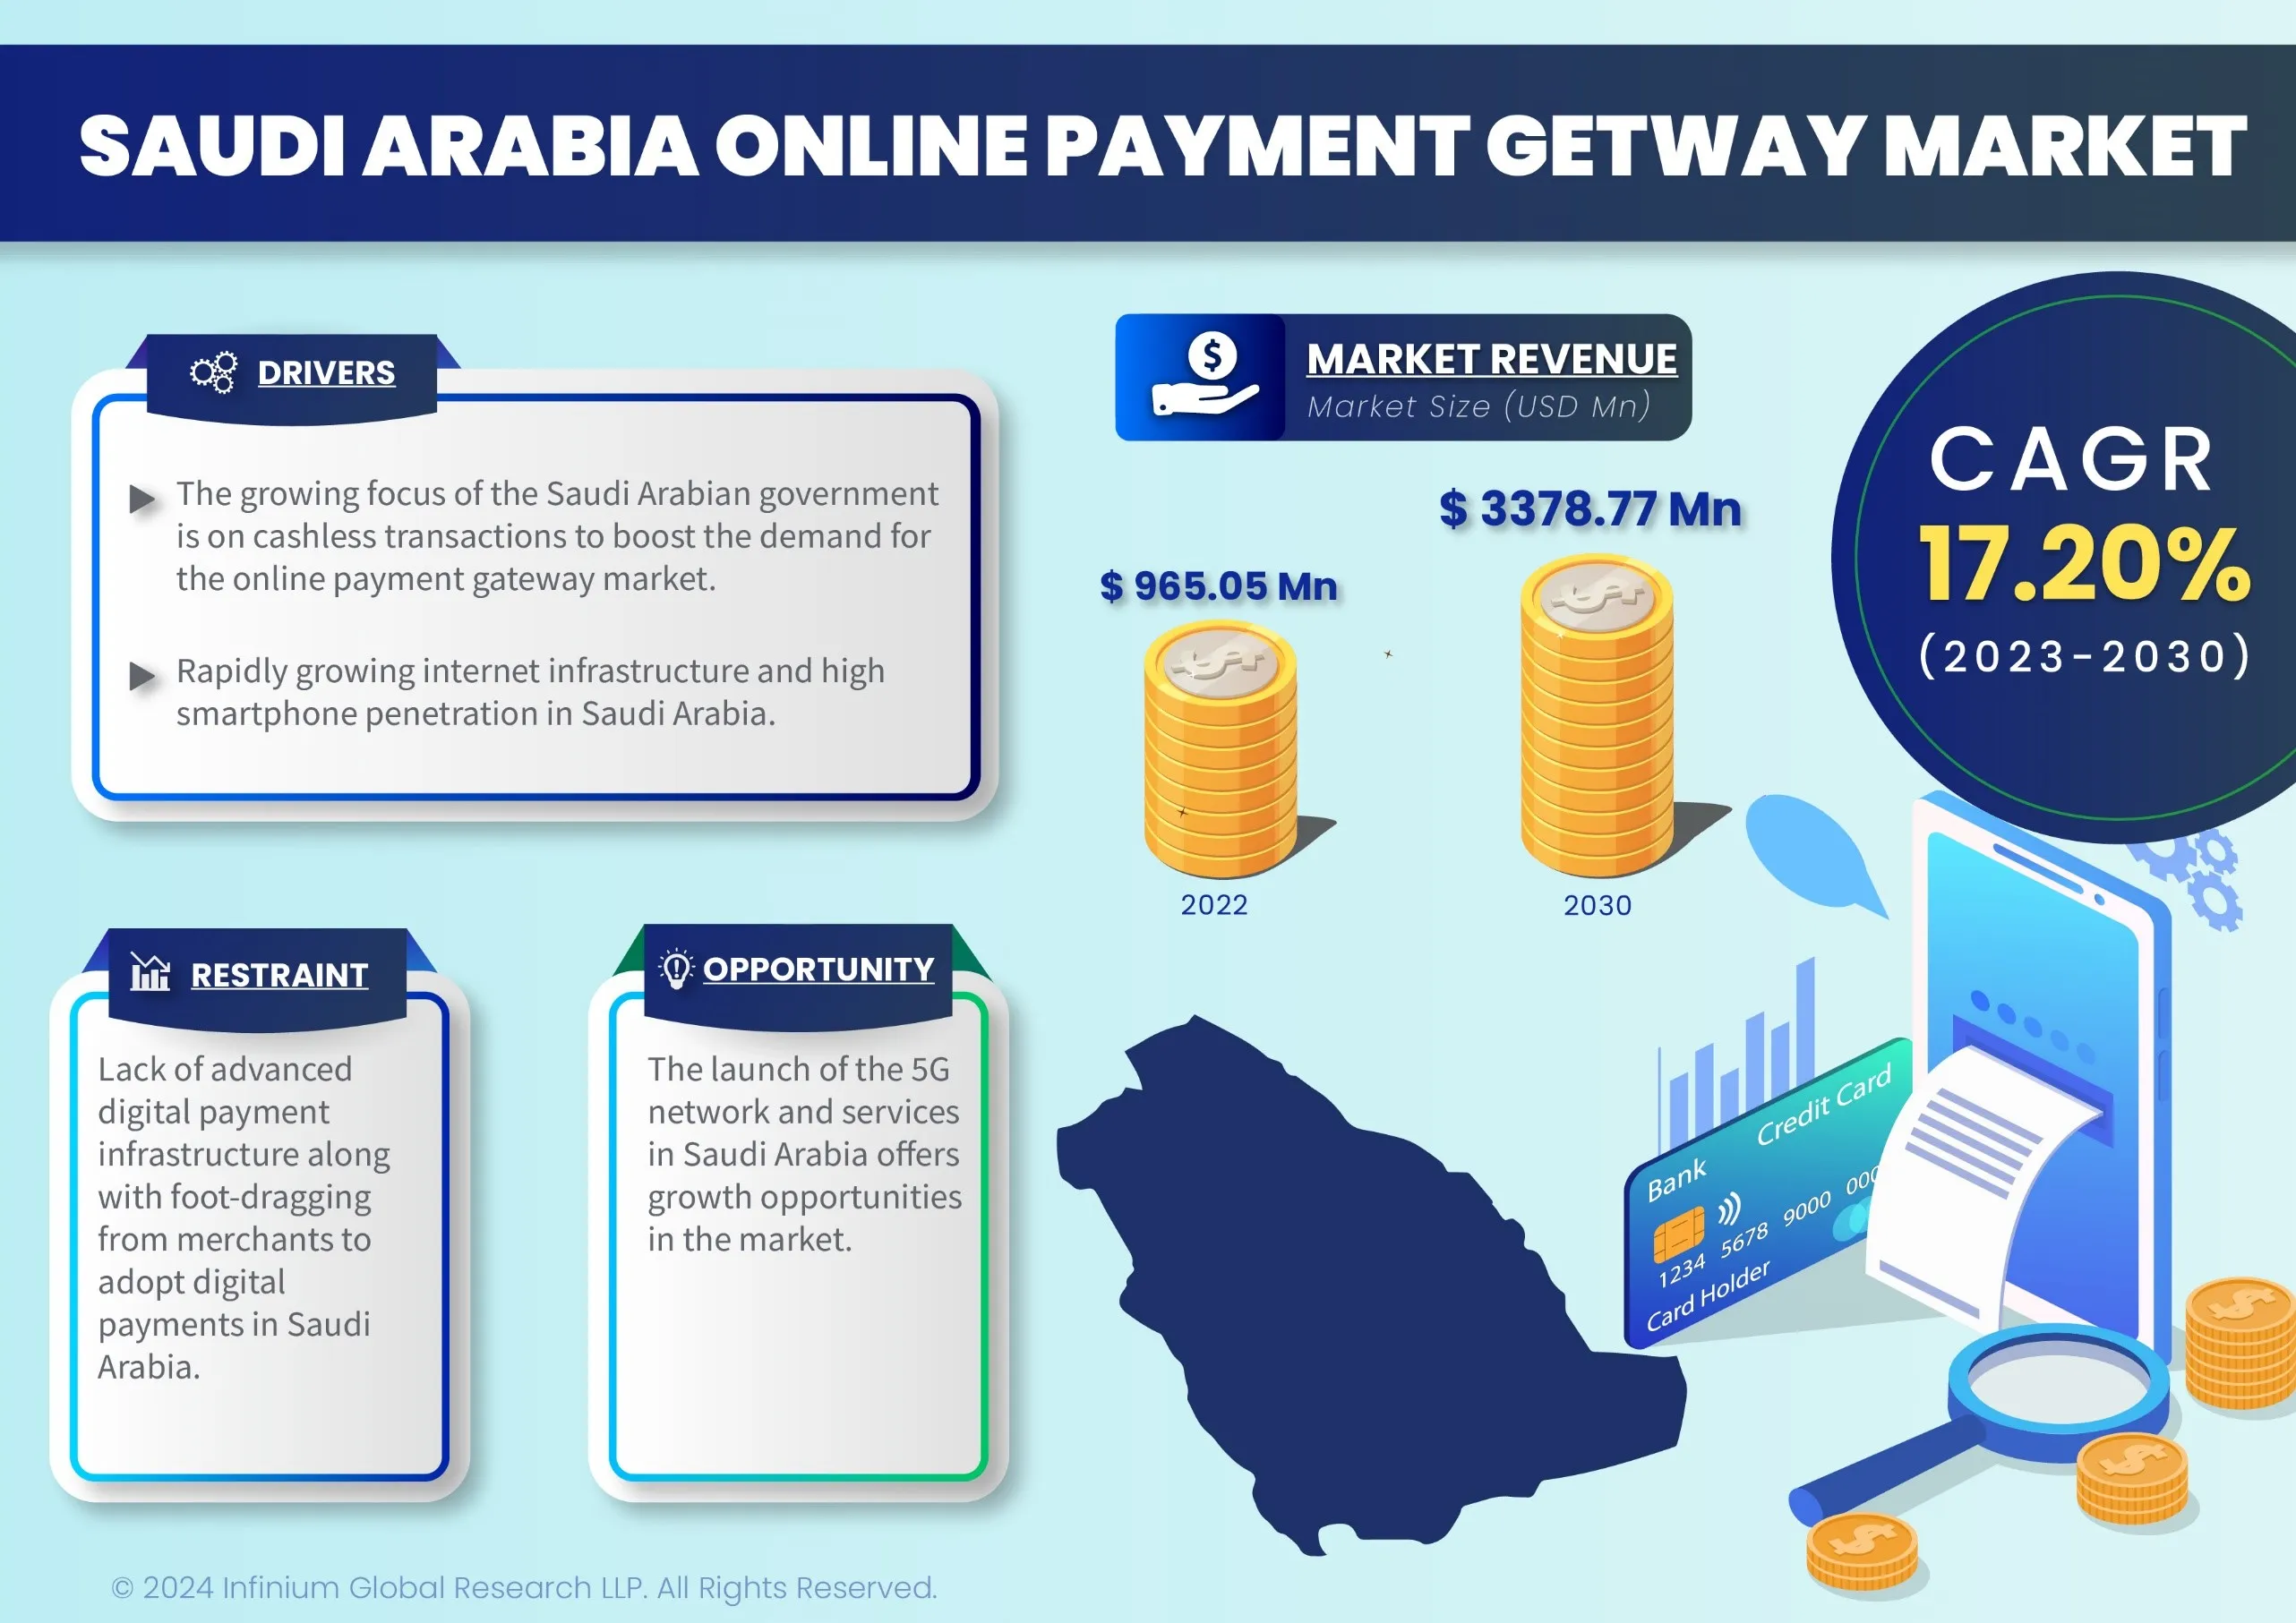 Saudi Arabia Online Payment Gateway Market was Valued at USD 965.05 Million in 2022 and is Expected to Reach USD 3378.77 Million by 2030 and Grow at a CAGR of 17.20% Over the Forecast Period.